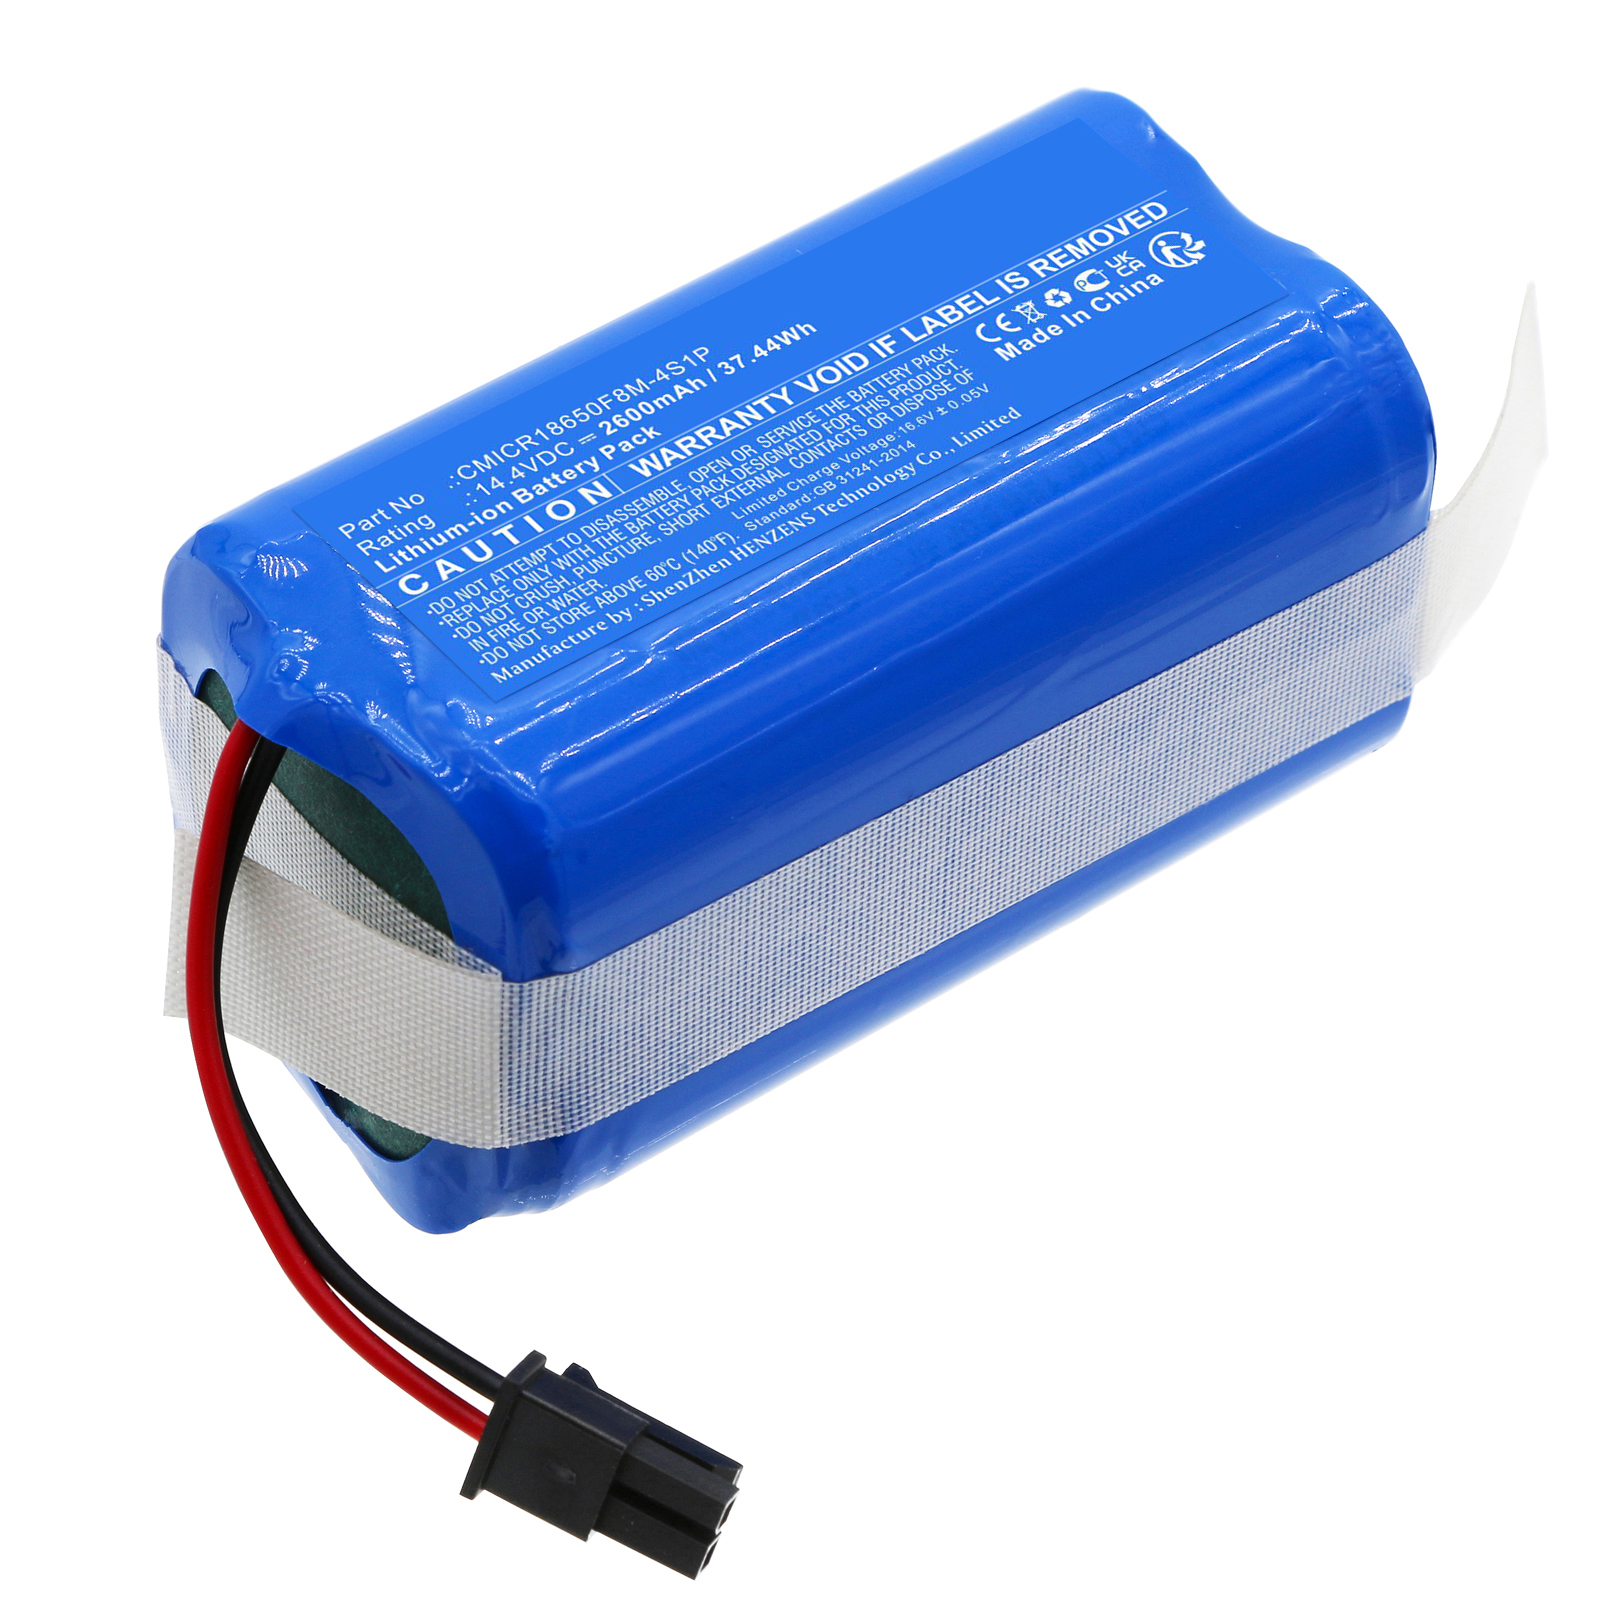 Synergy Digital Vacuum Cleaner Battery, Compatible with RoboJet CMICR18650F8M-4S1P Vacuum Cleaner Battery (Li-ion, 14.4V, 2600mAh)